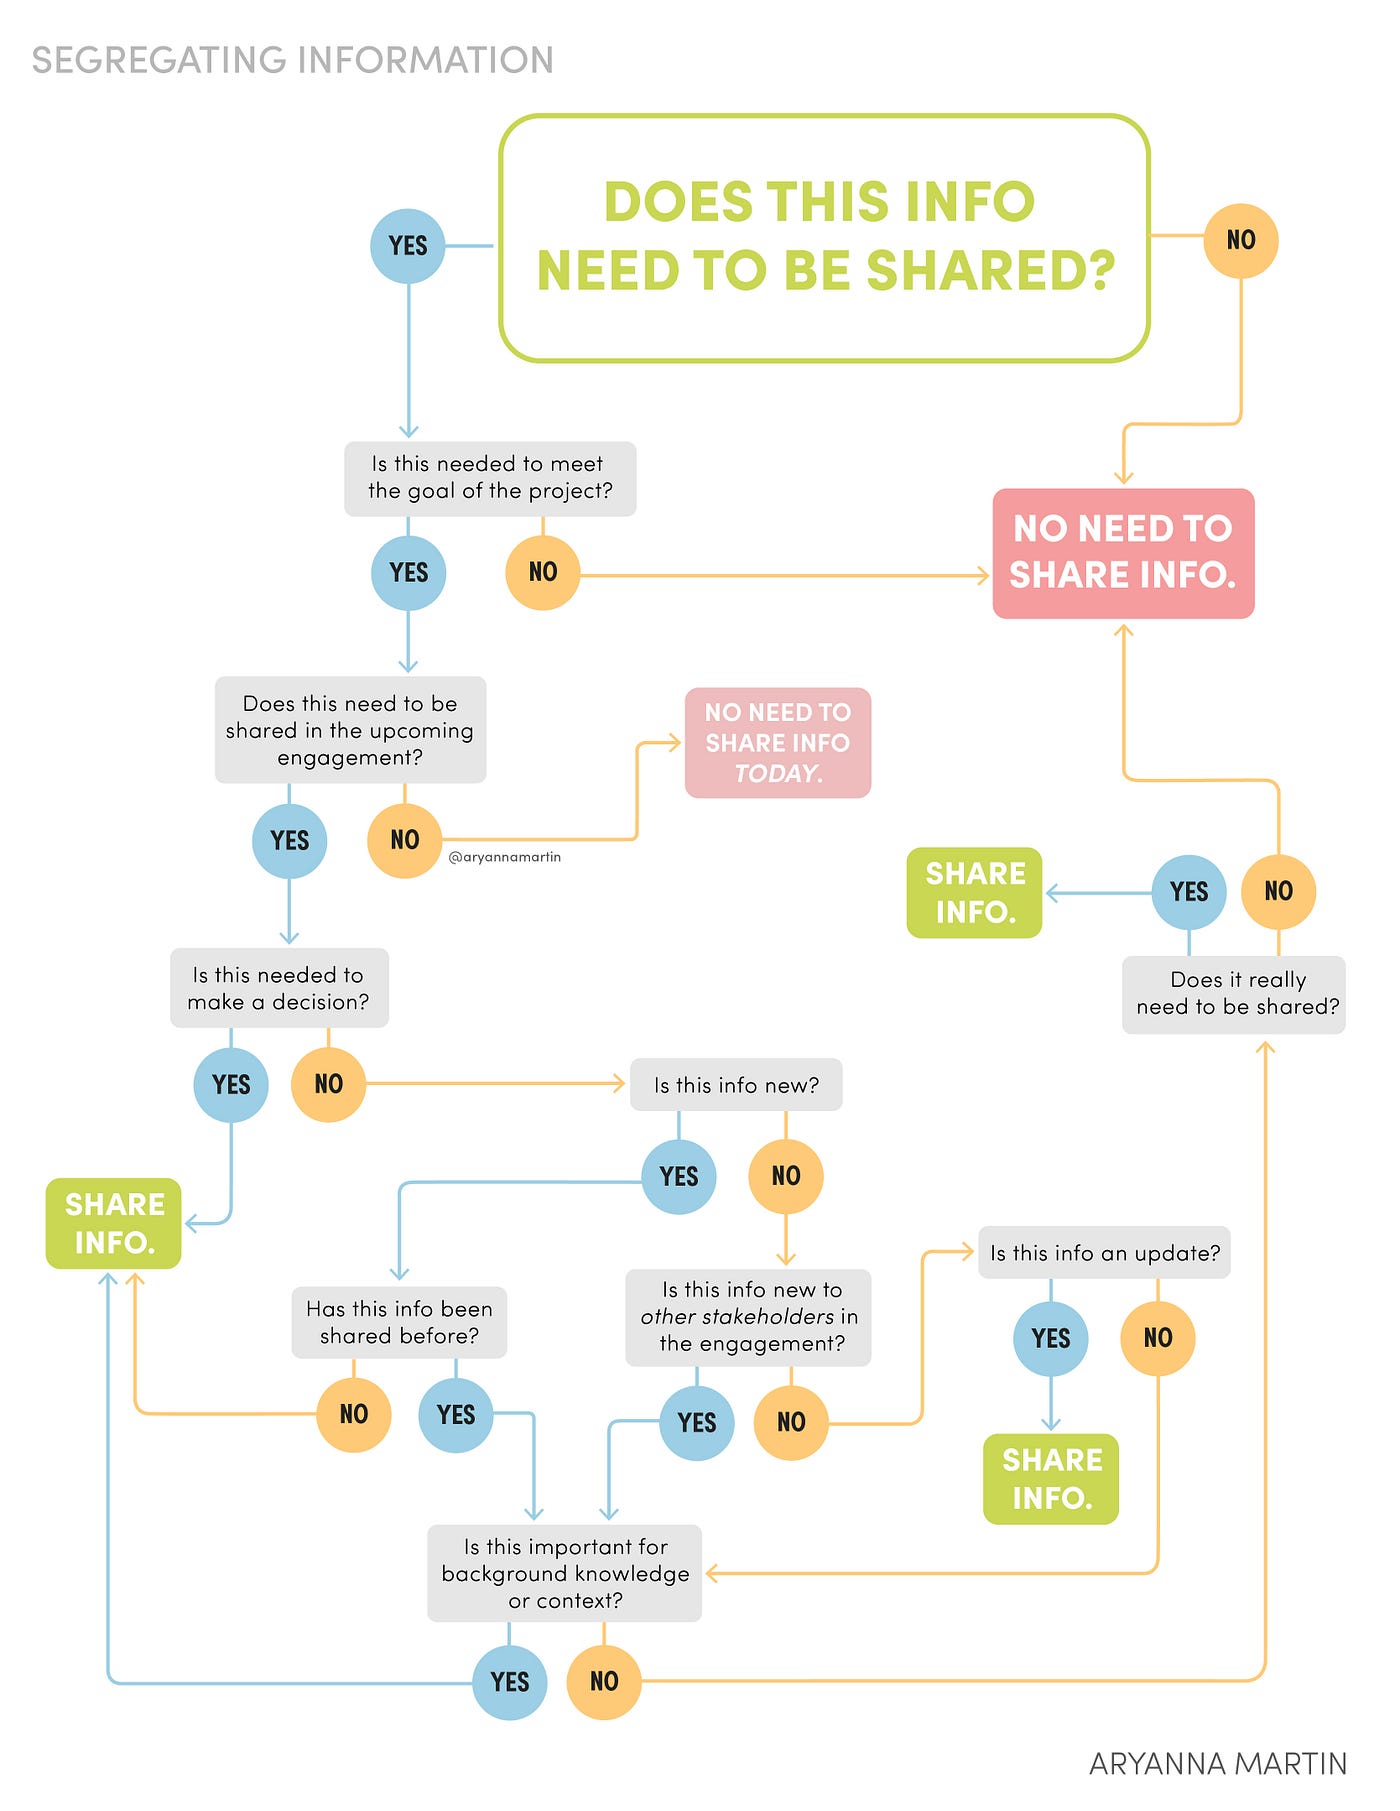 A Yes-No Diagram that can guide decision-making on whether a piece of information needs to be shared